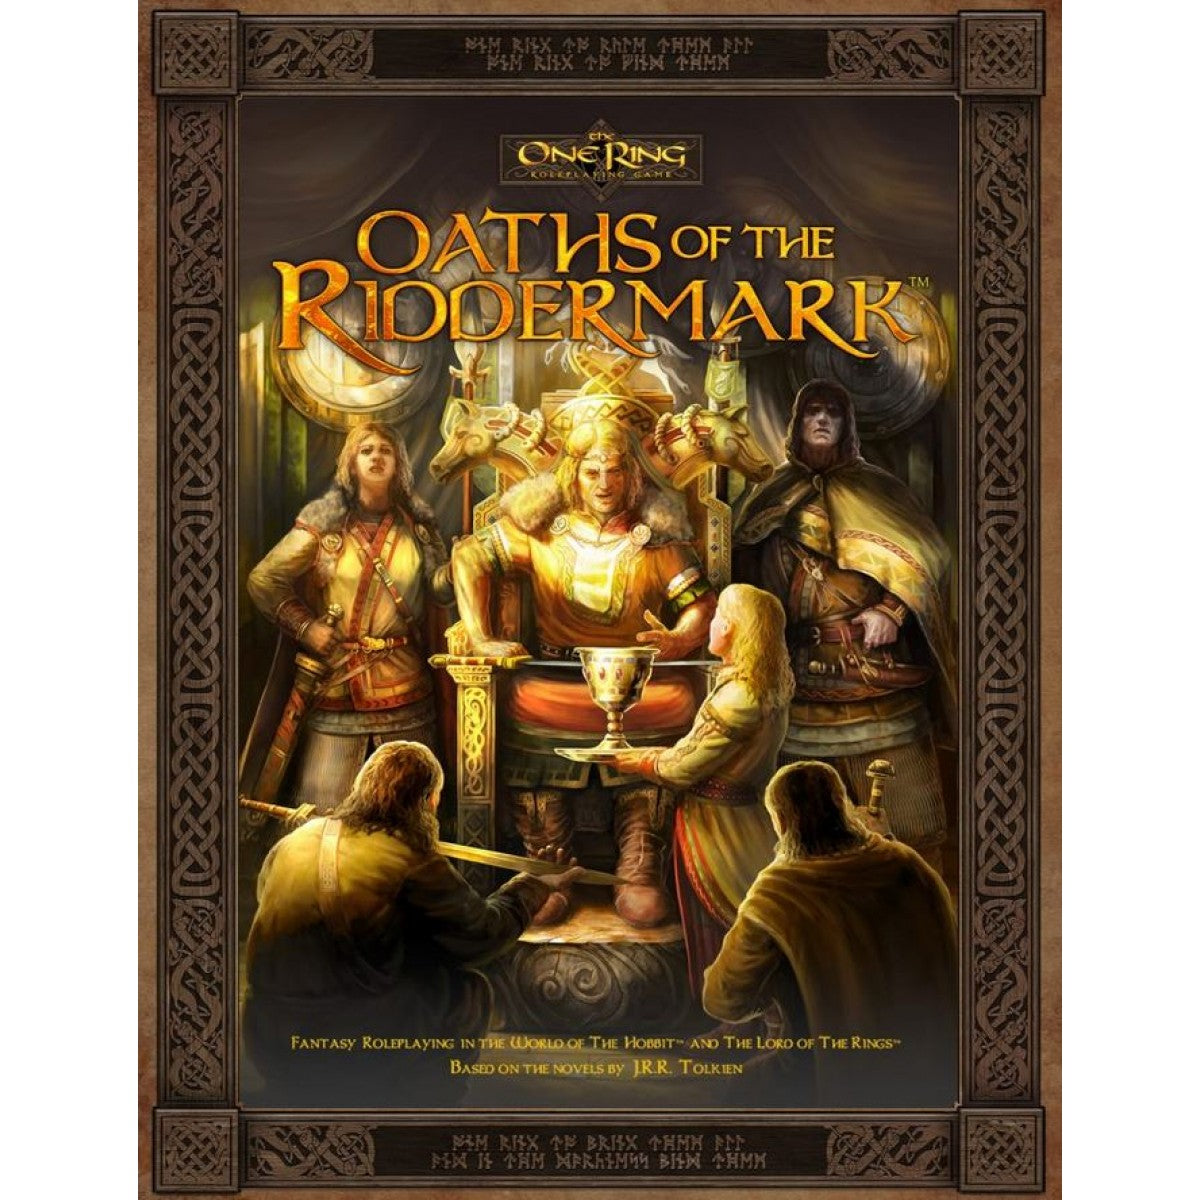 The One Ring: Oaths Of The Riddermark